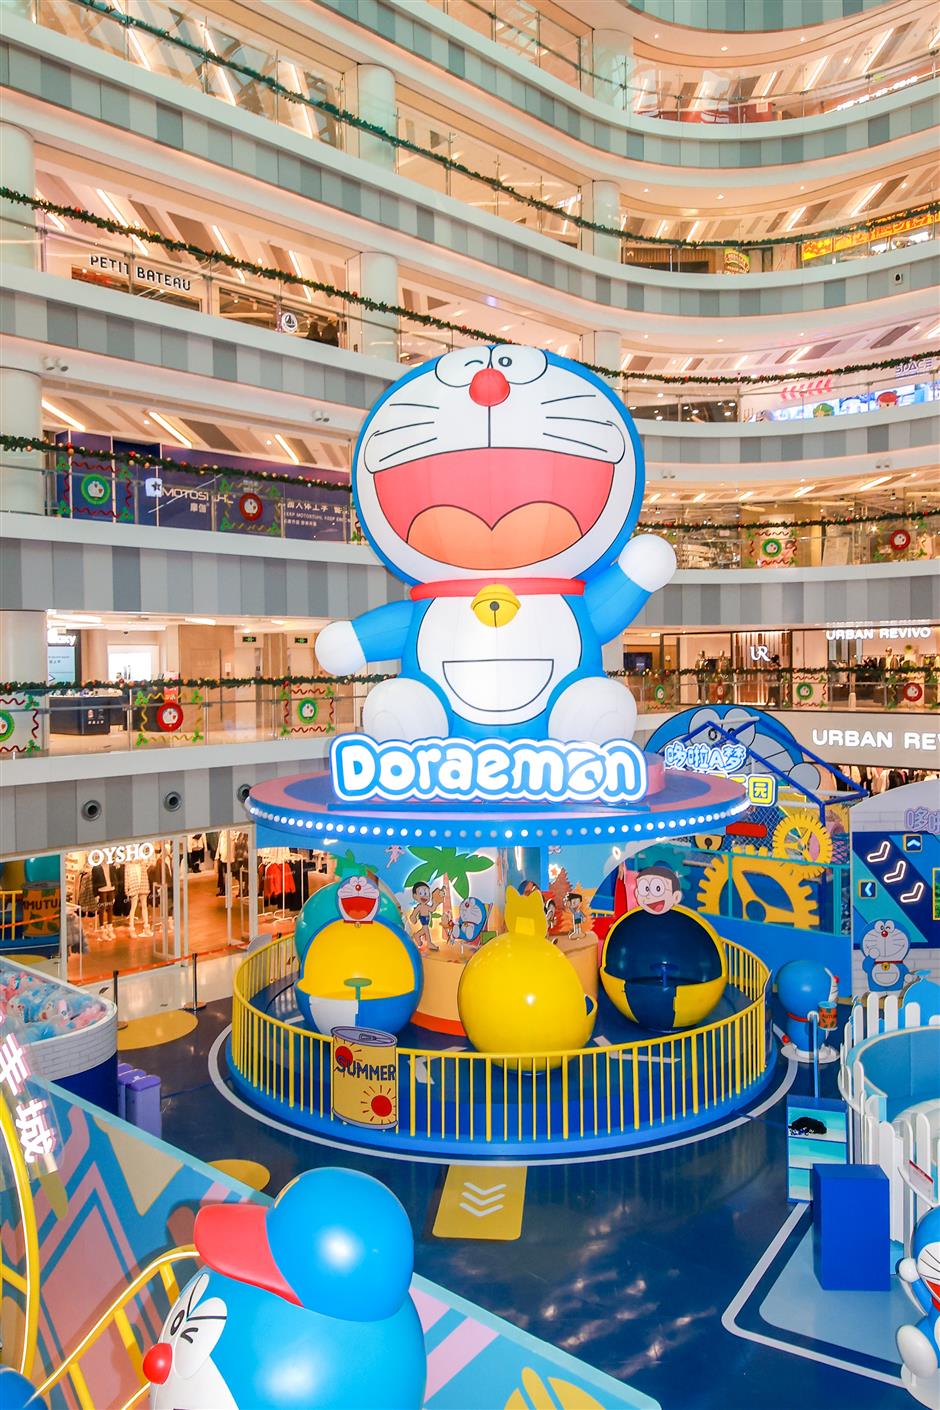 Everyone's favorite blue cat, Doraemon, comes to Shanghai for a special exhibition